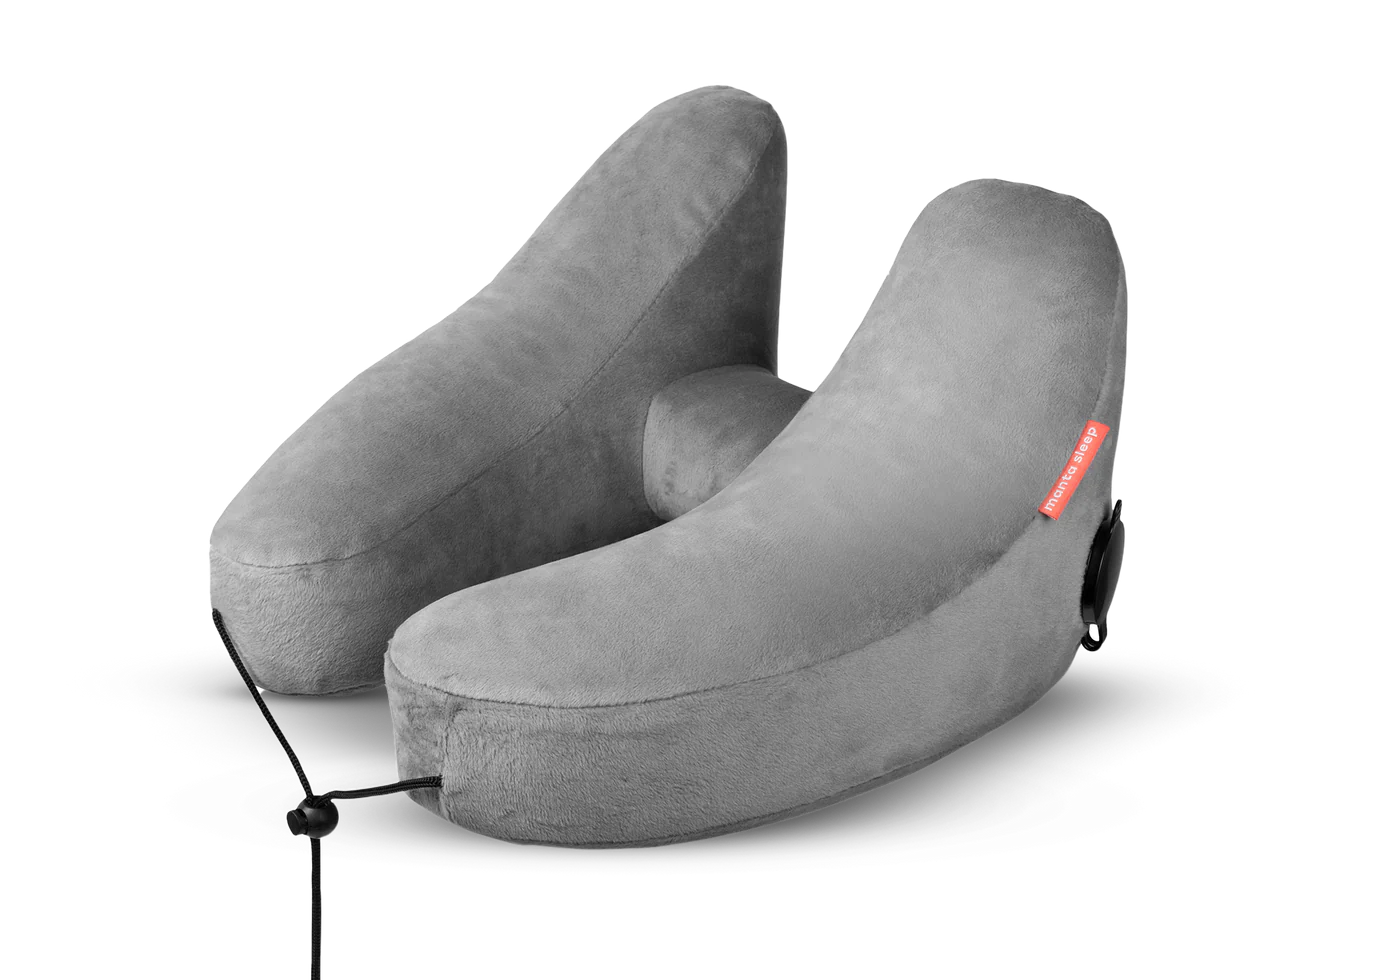 A gray travel pillow for quality sleep during travel.